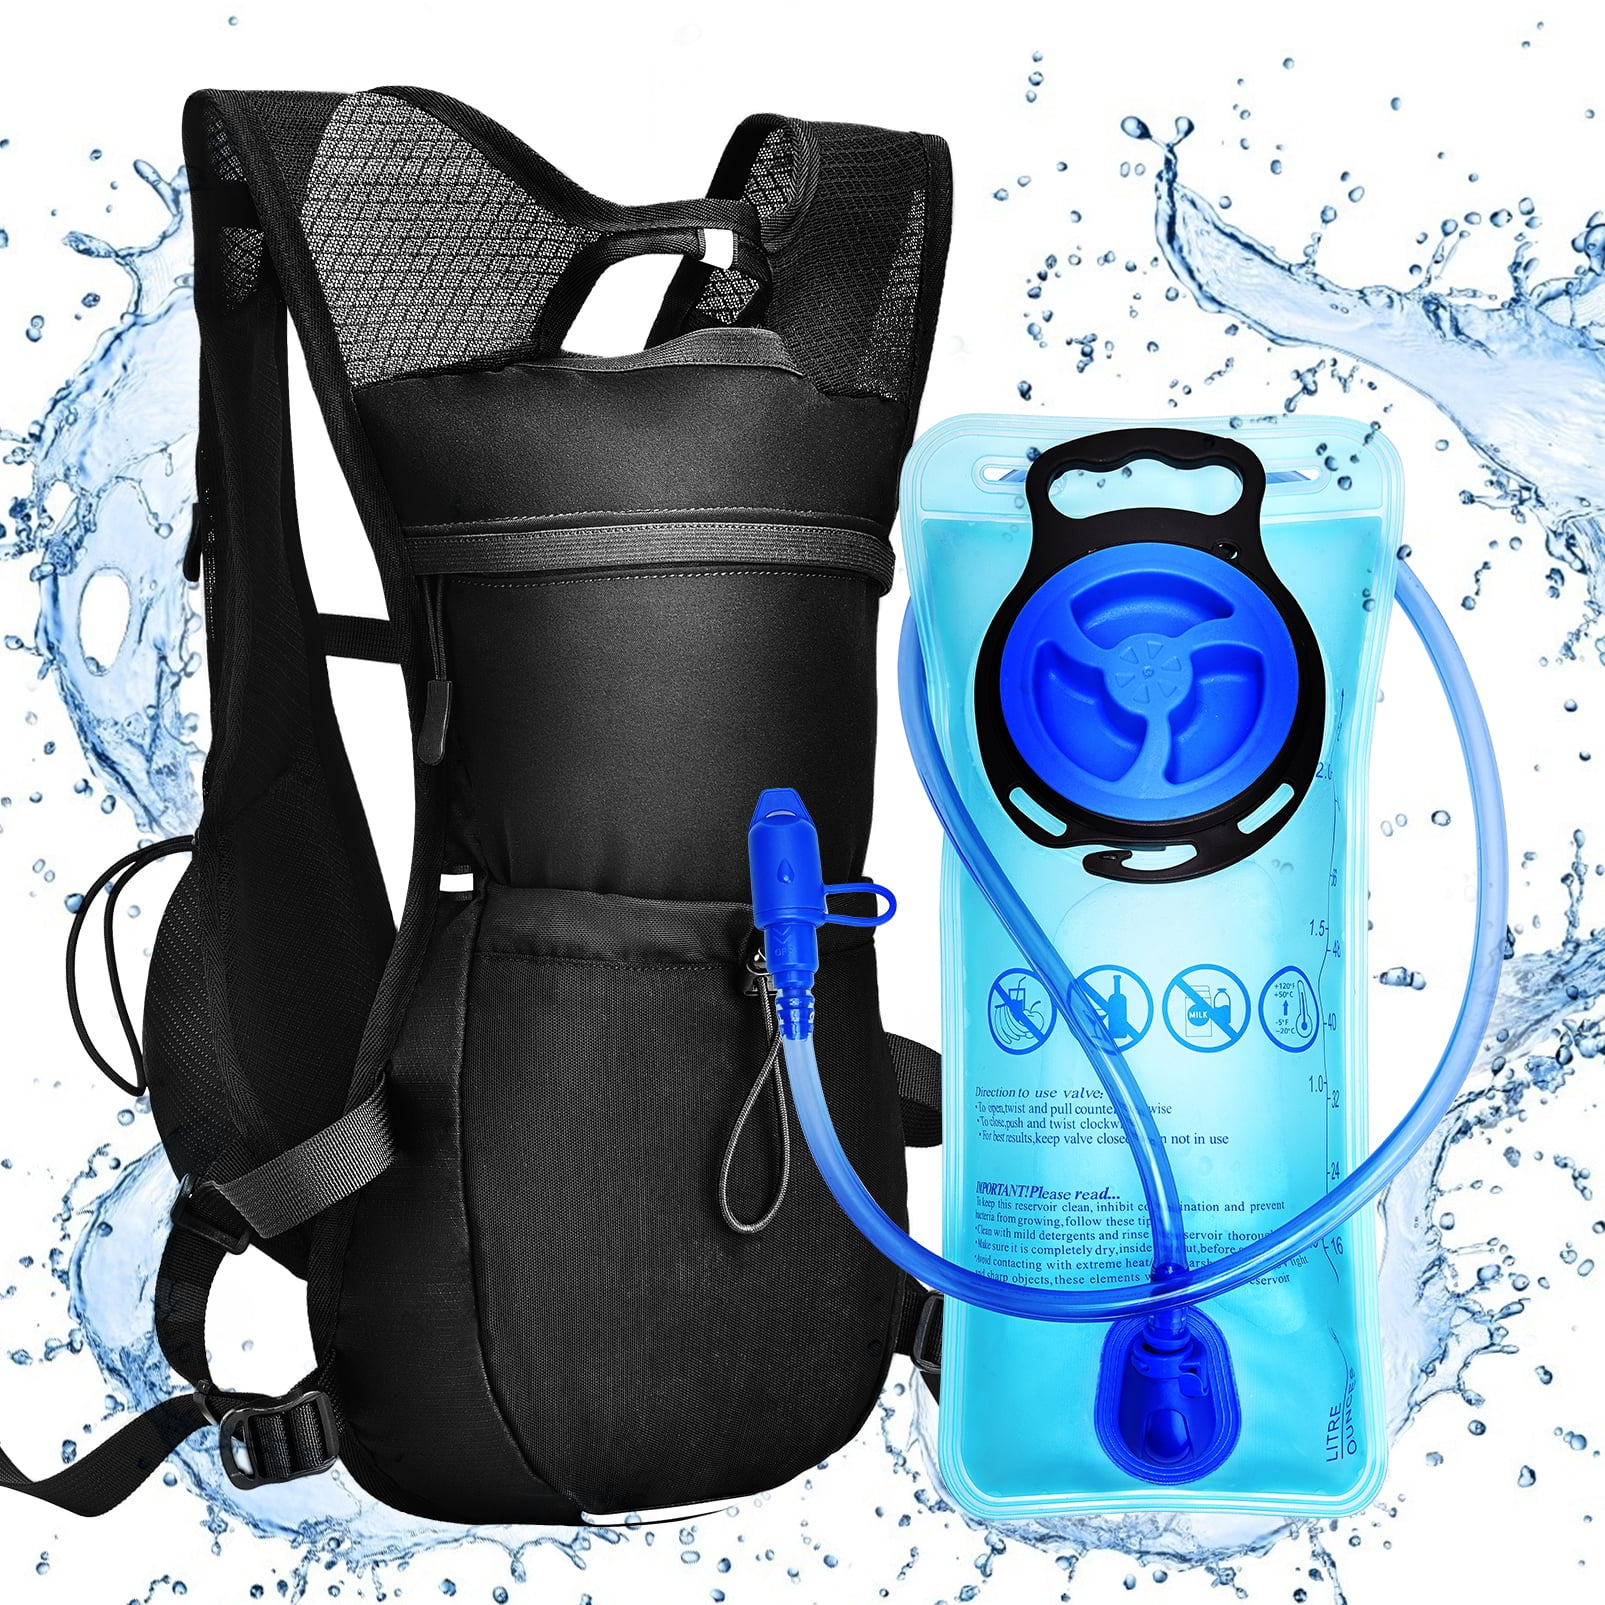 for Hiking Biking Running Walking Climbing VBIGER Hydration Backpacks with 2L Water Bladder Bag 1Replaceable Mouth Piece Large-Capacity Water Bag with 1 Brush 